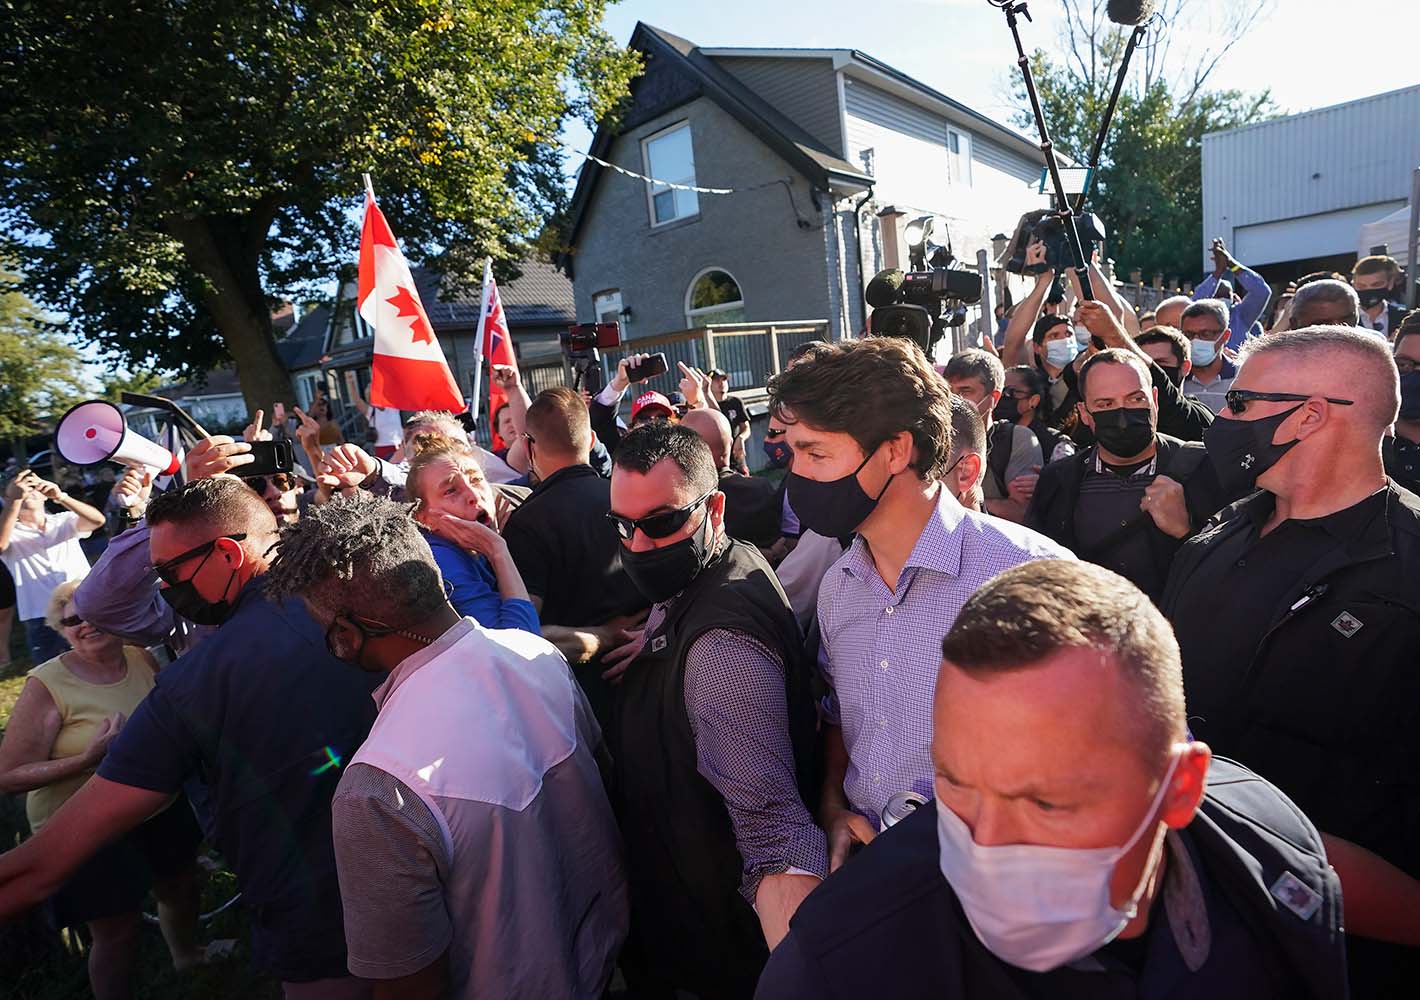 Justin Trudeau walks through a crowd of protesters, some yelling and holding Canadian flags, while surrounded by RCMP security personnel. They are wearing masks due to the COVID-19 pandemic.